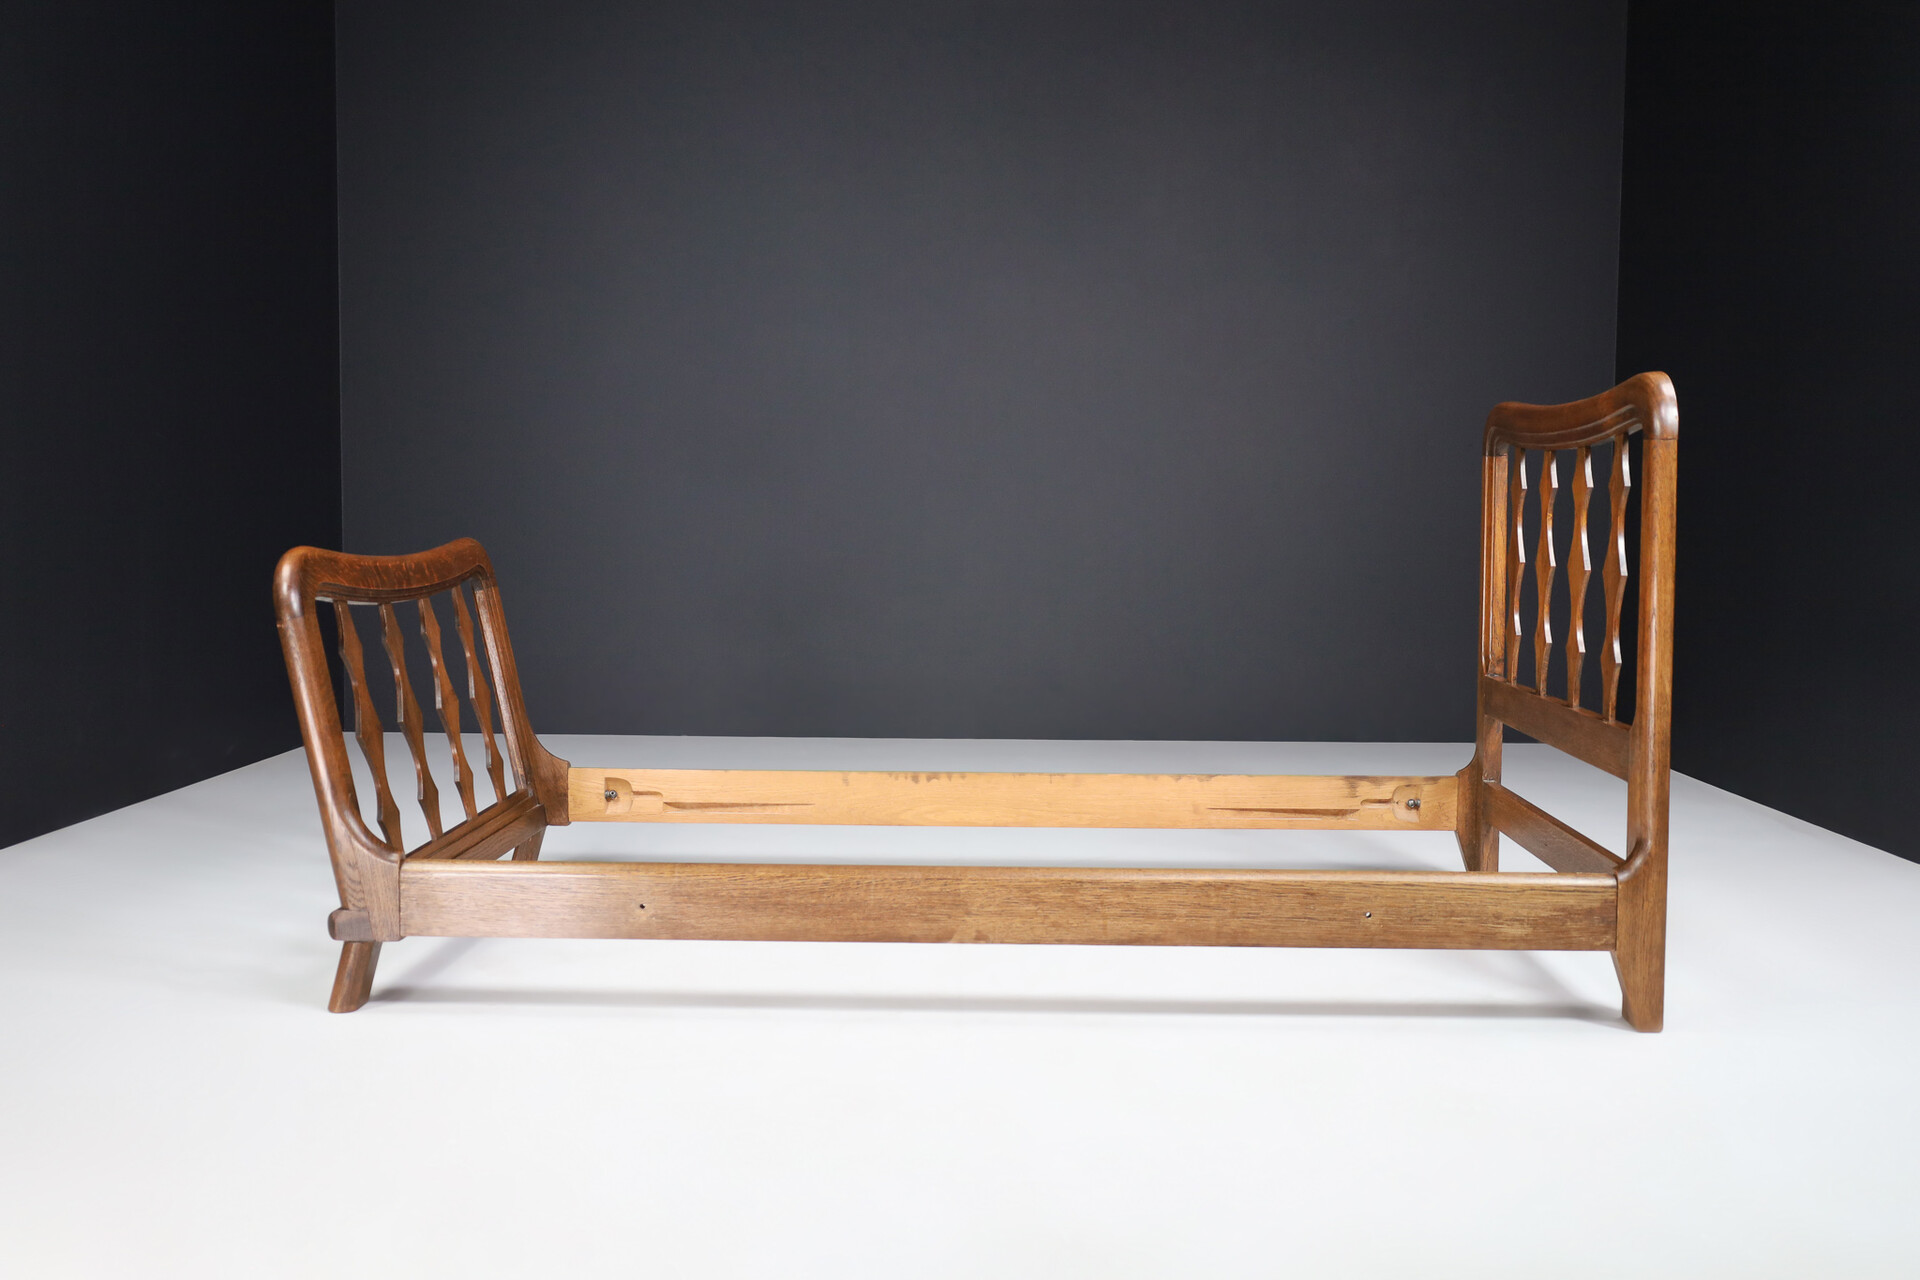 Mid century modern Guillerme & Chambron  Bed in Solid Oak , France 1960s Mid-20th century